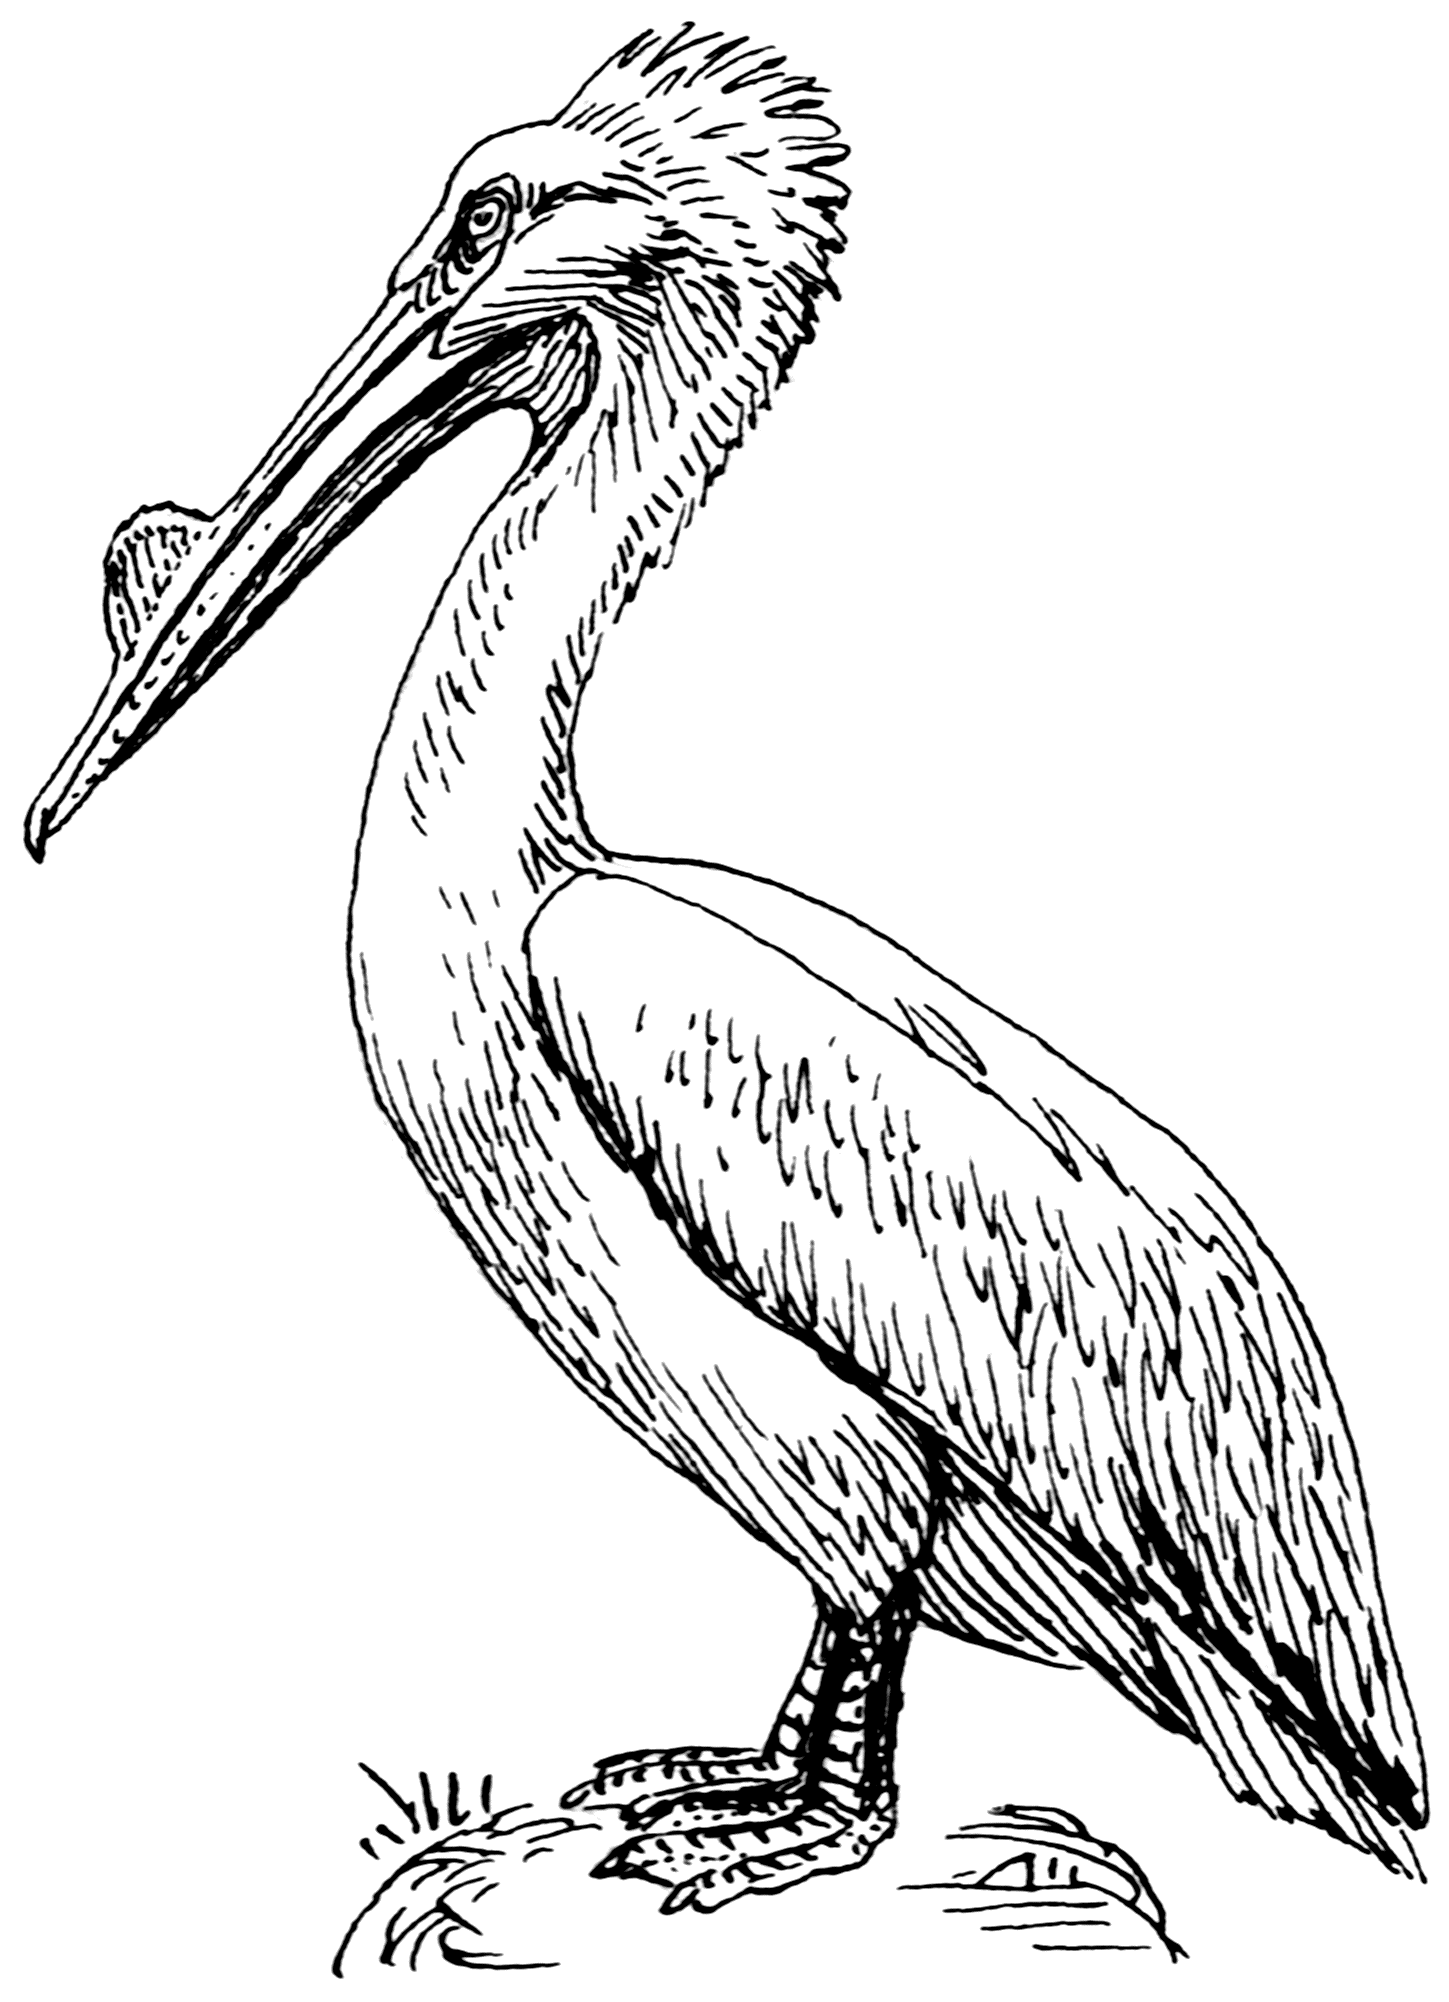 Easy Pelican Sketch Drawing with Realistic